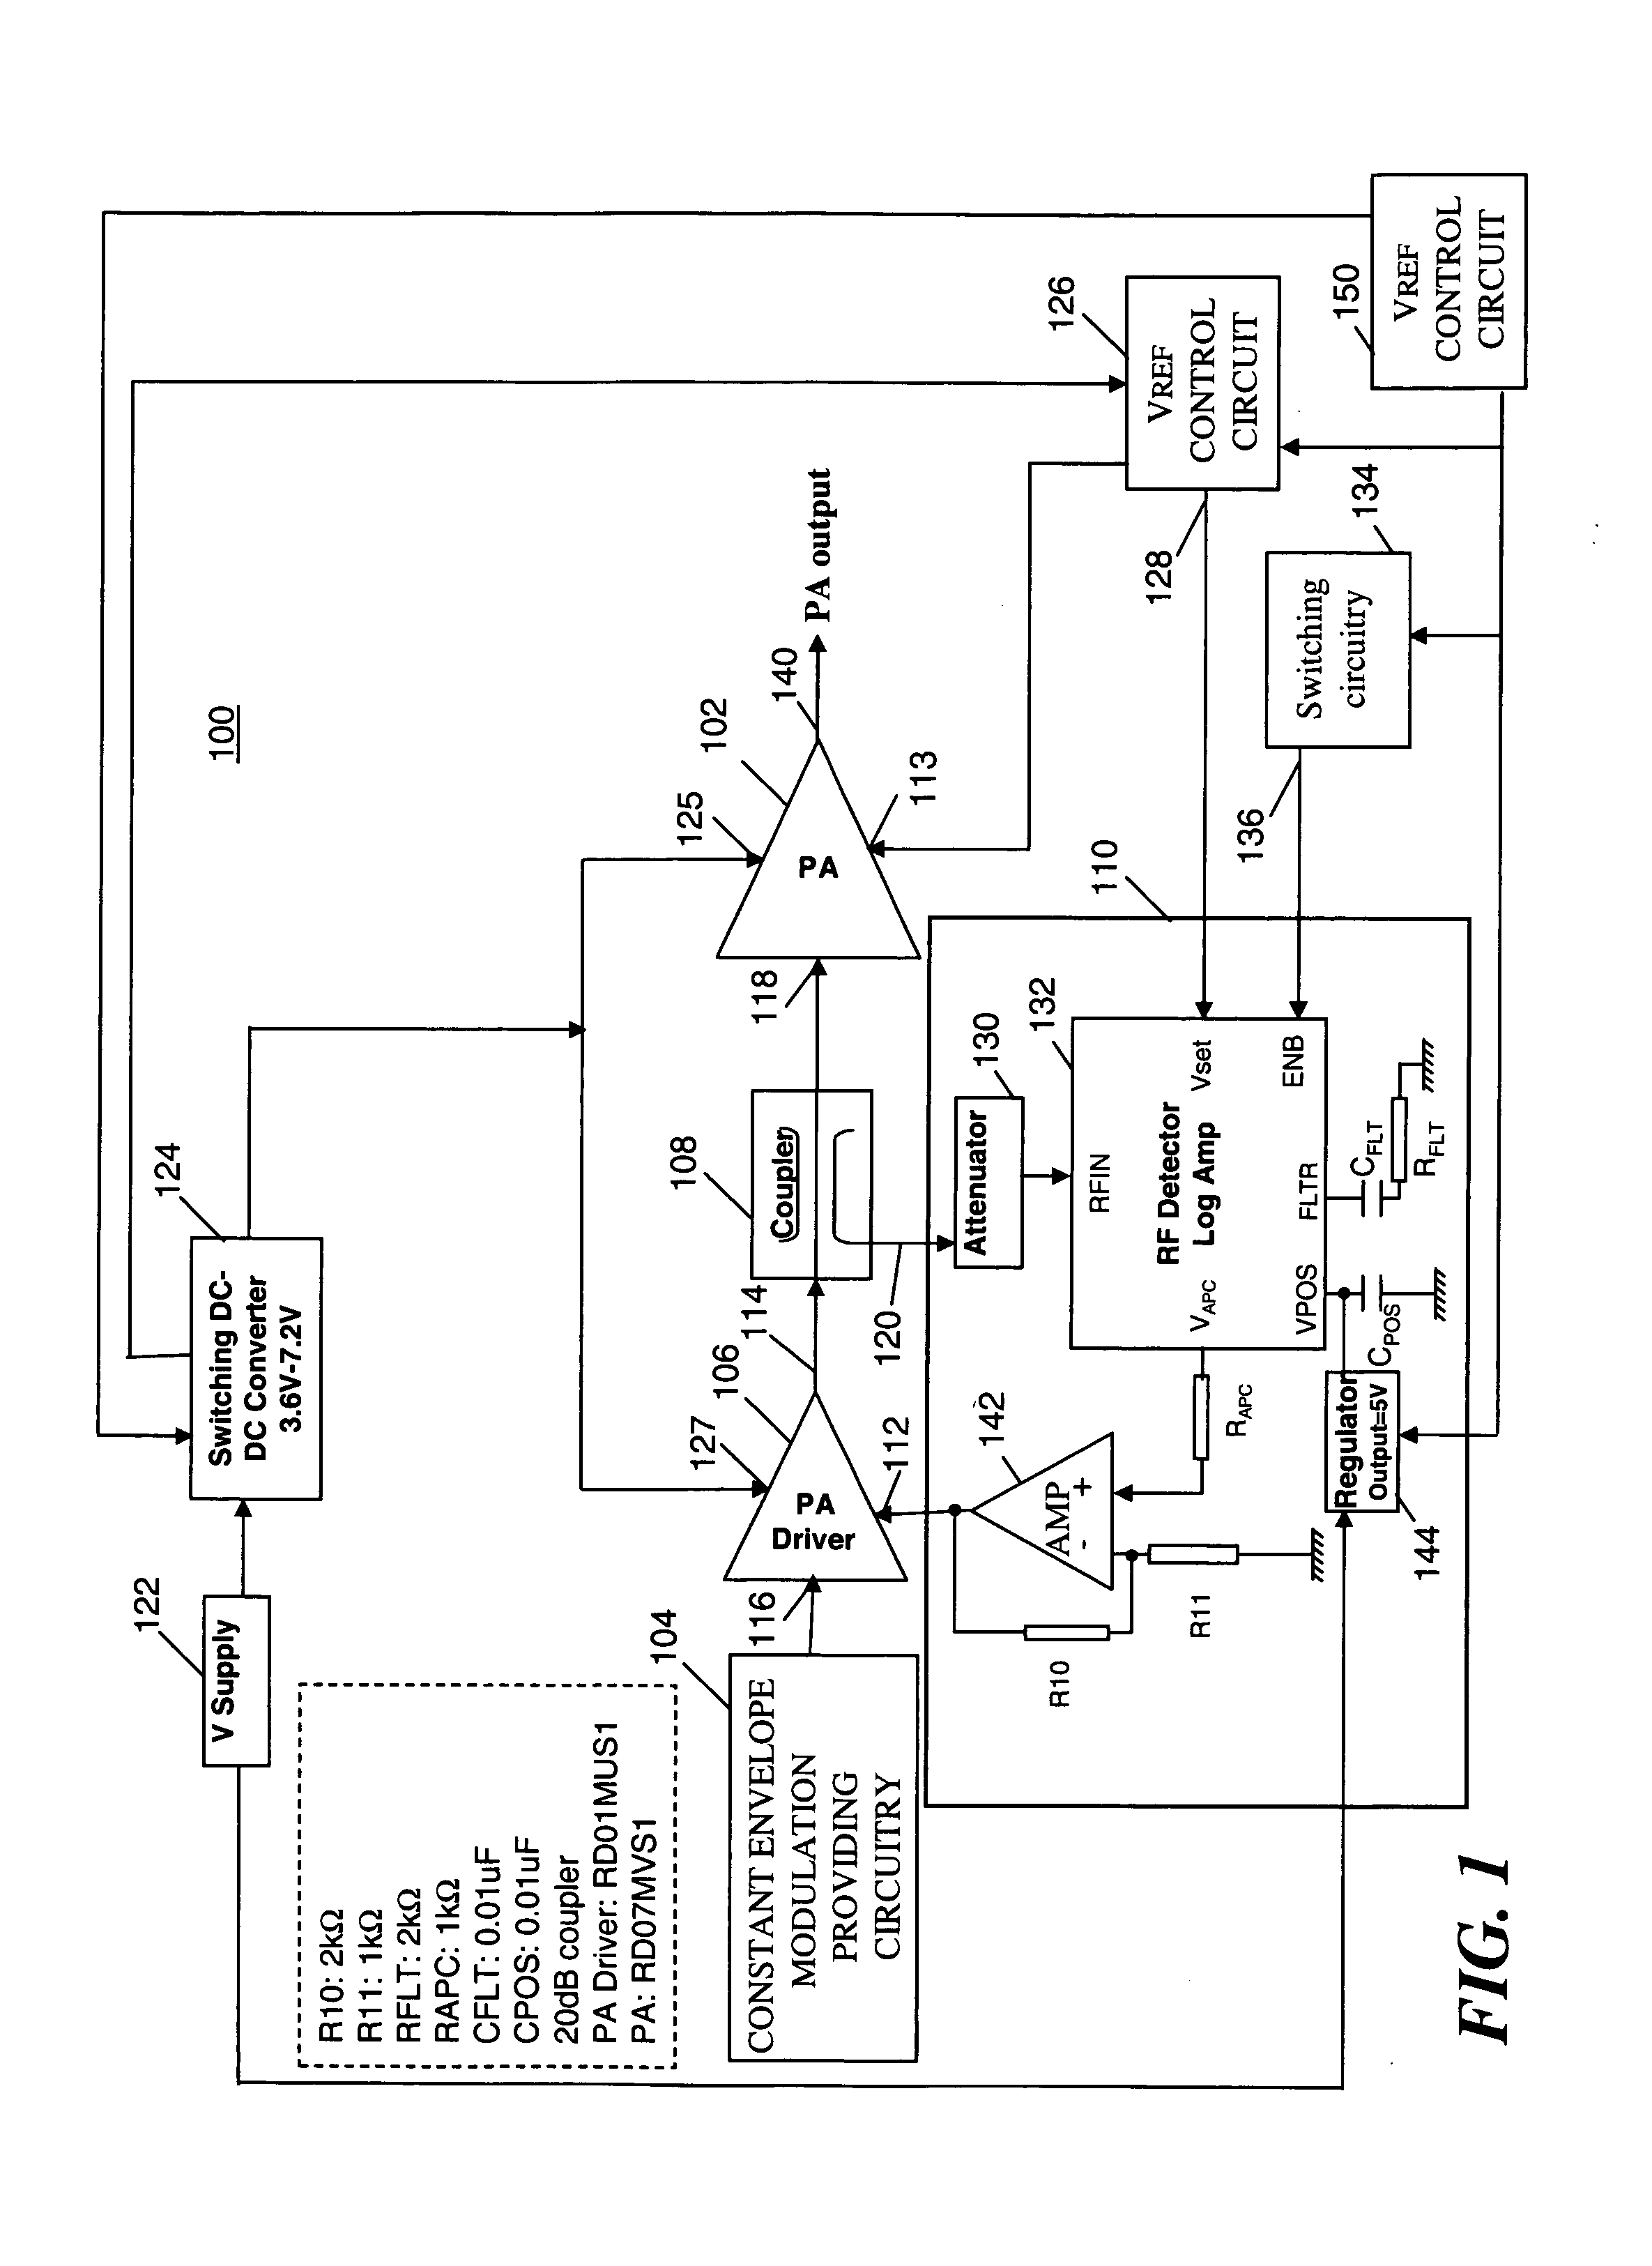 Radio frequency power amplifier circuit and method